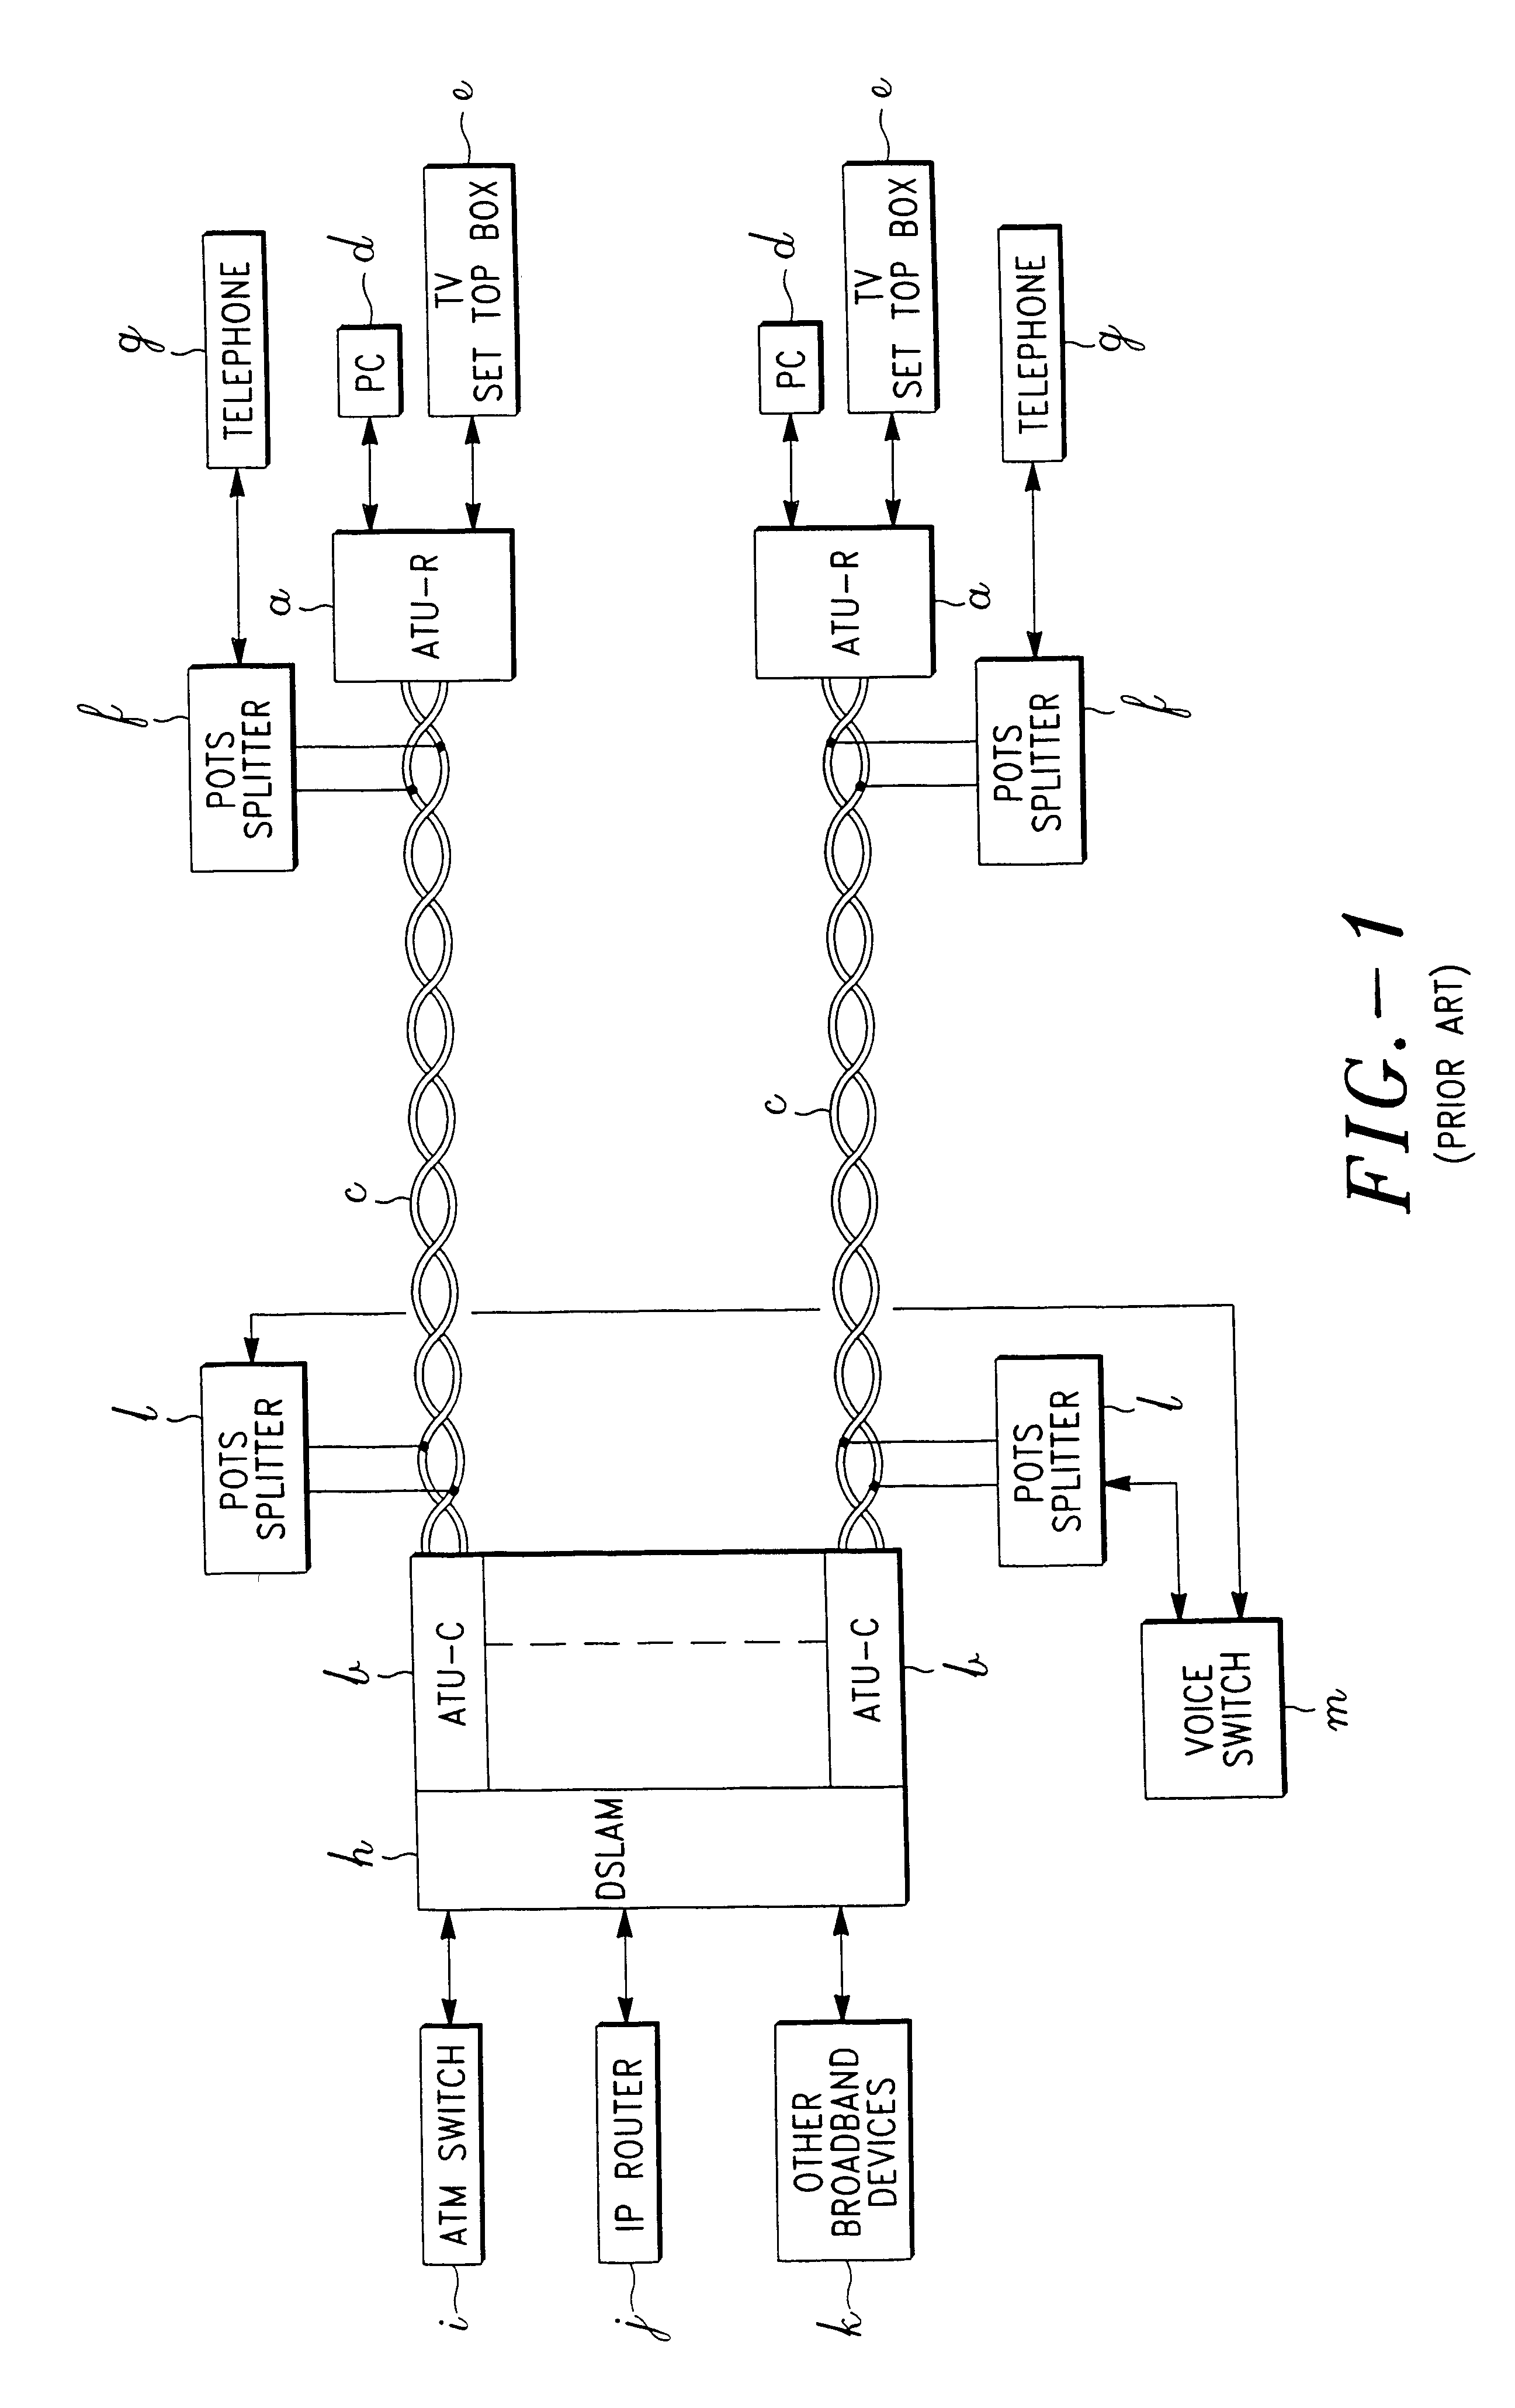 System and method for extending the operating range and/or increasing the bandwidth of a communication link